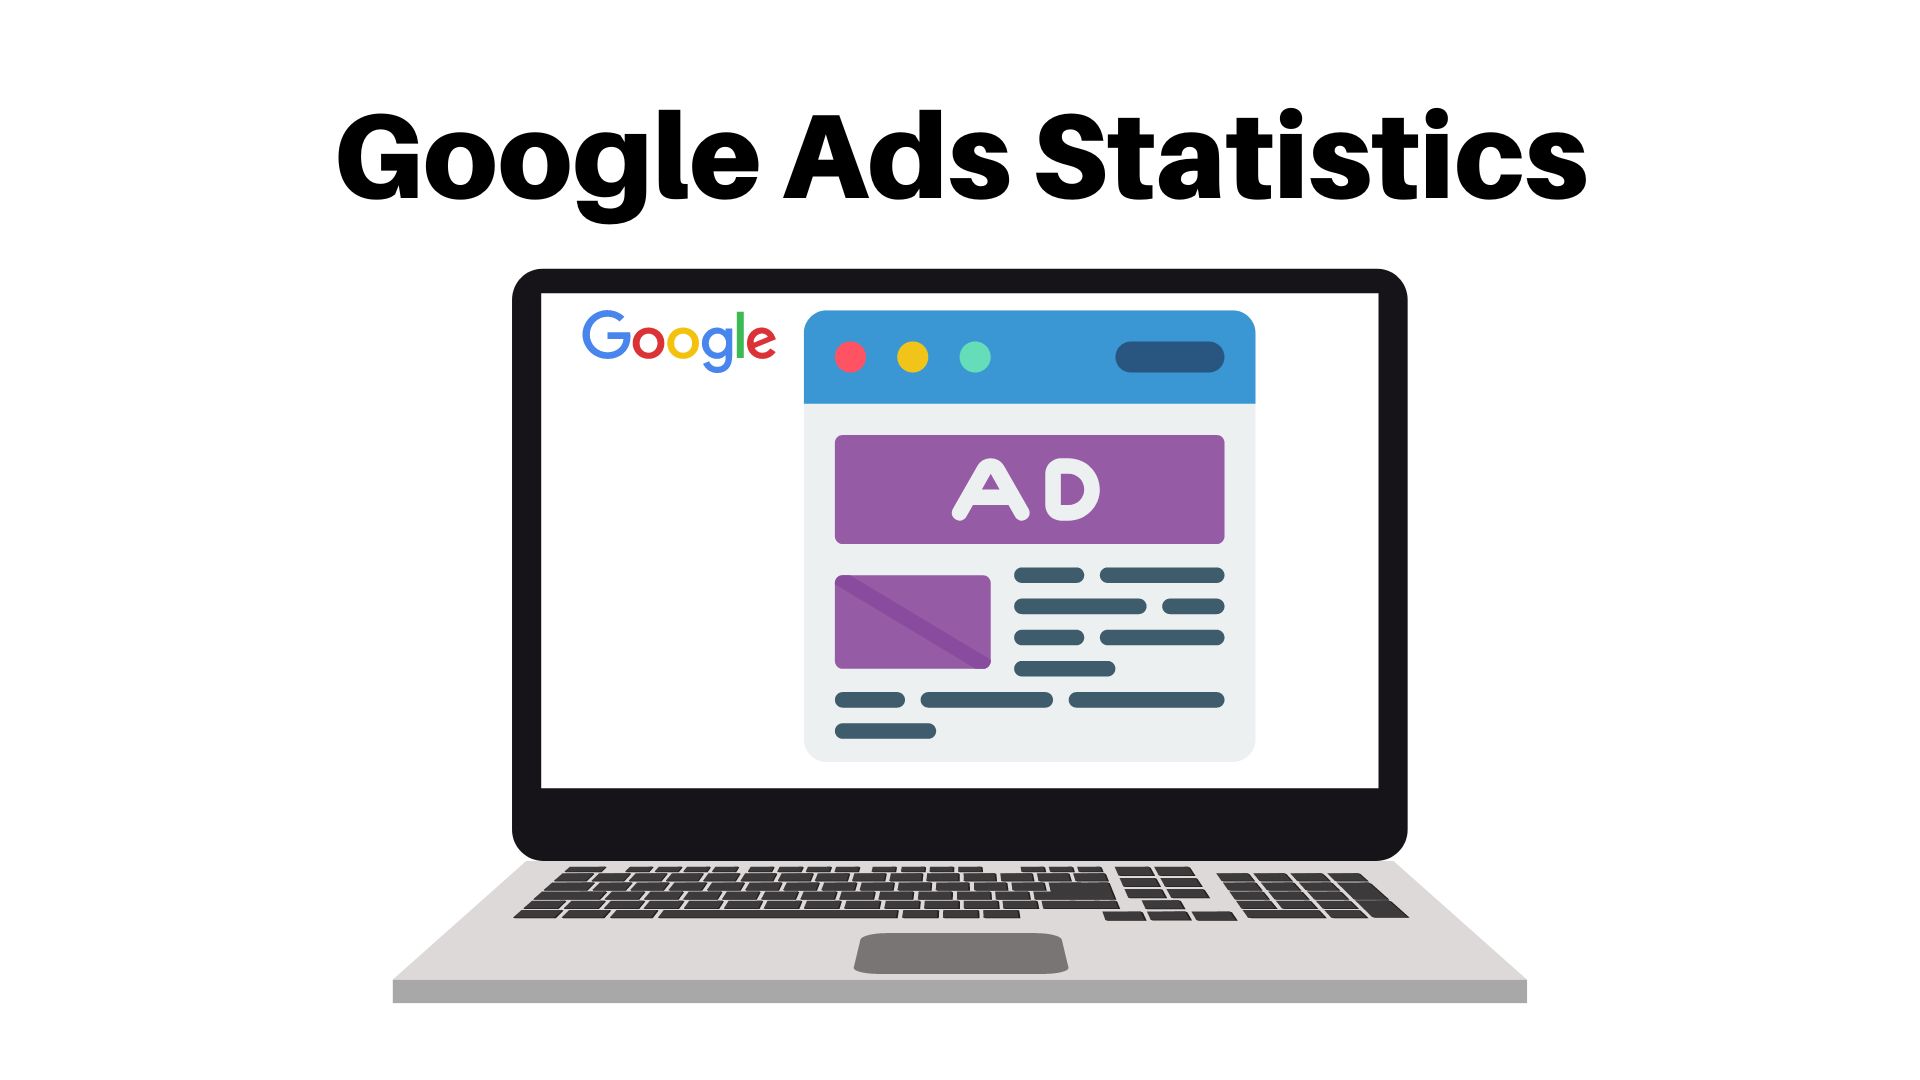 Google Ads Statistics 20022 – Revenue, Market Share and Facts